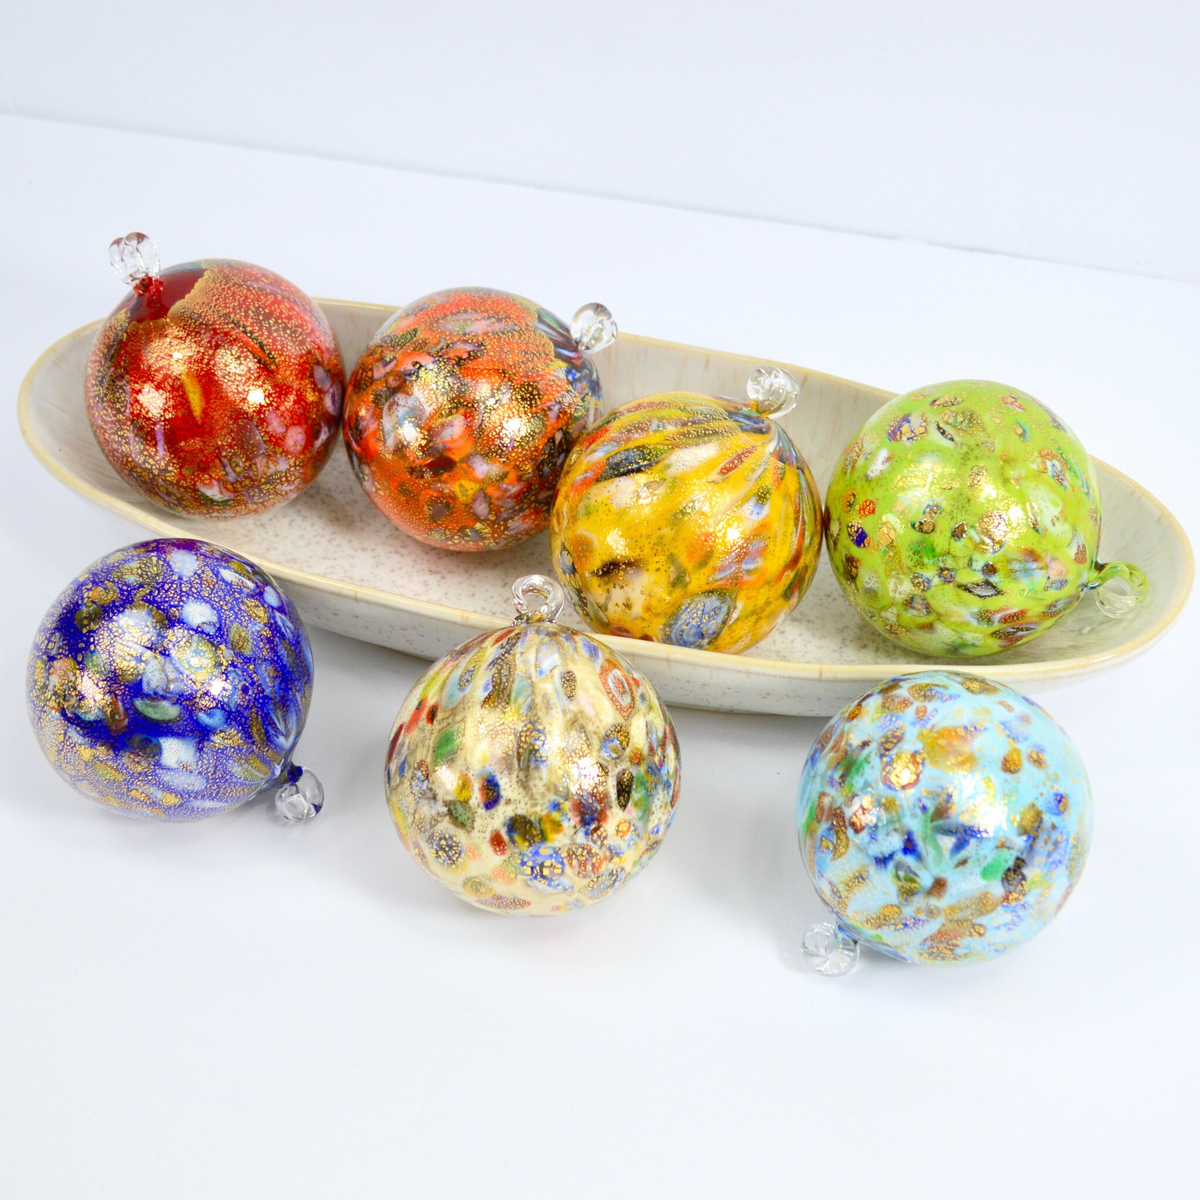 Murano Blown Glass Holiday Ornament with Spotted Macchia Accents, Made in Murano, Italy - My Italian Decor